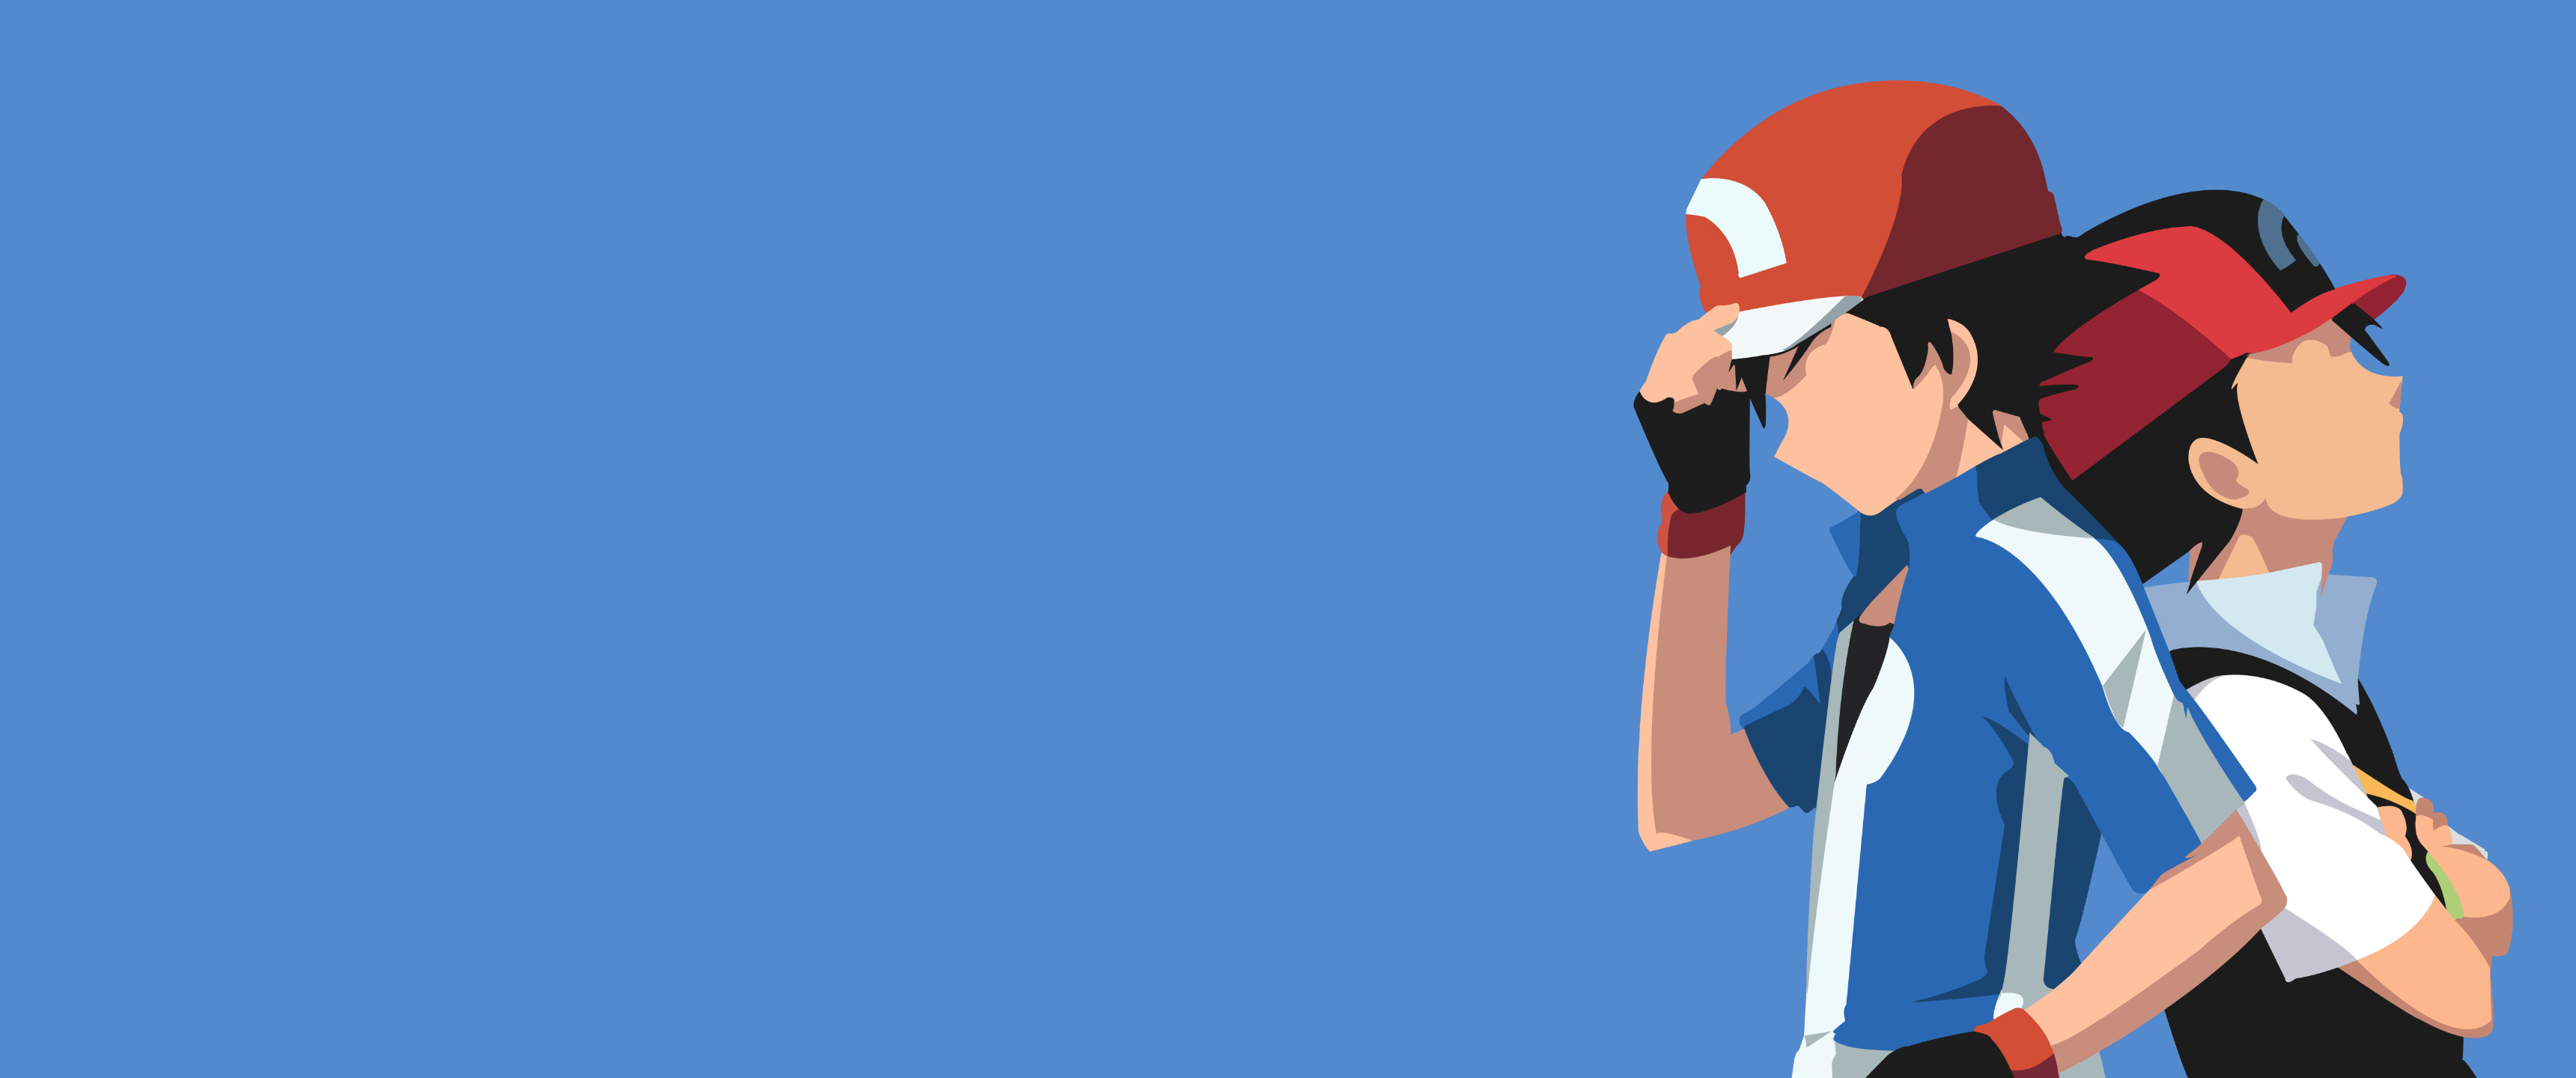 180+ Ash Ketchum HD Wallpapers and Backgrounds